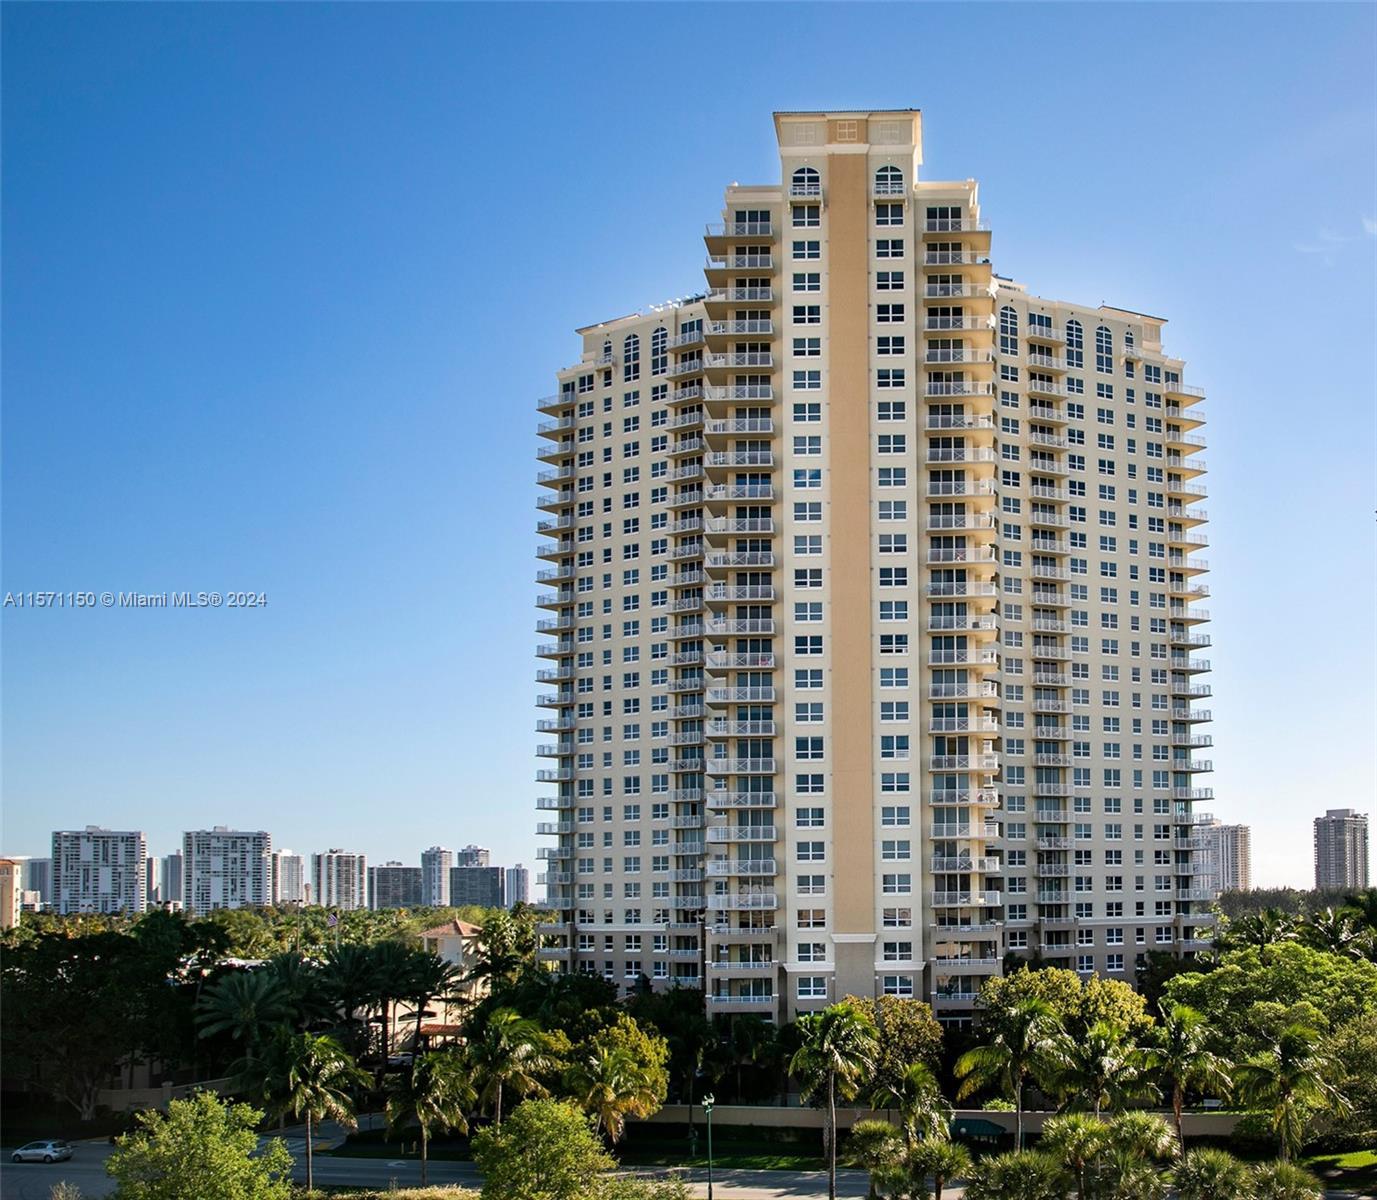 EXPERIENCE LUXURY LIVING AT TURNBERRY ISLES GOLF COURSE CONDO IN AVENTURA, FLORIDA. THIS 1-BED, 1-BA